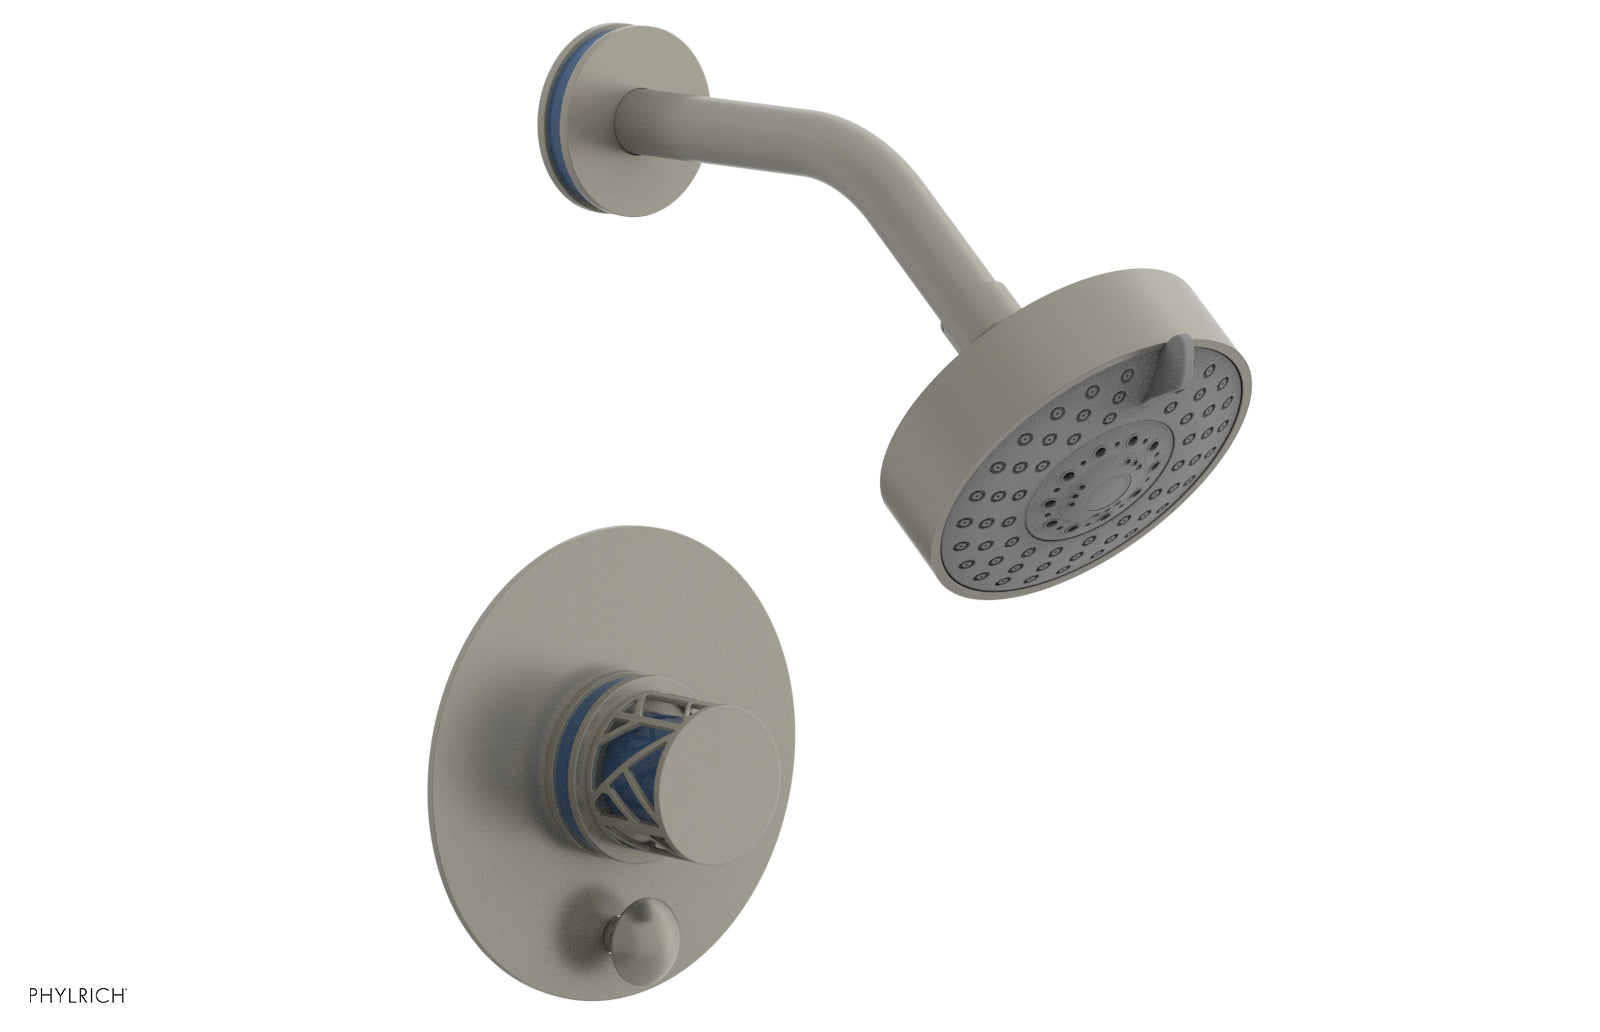 Phylrich JOLIE Pressure Balance Shower and Diverter Set (Less Spout), Round Handle with "Light Blue" Accents